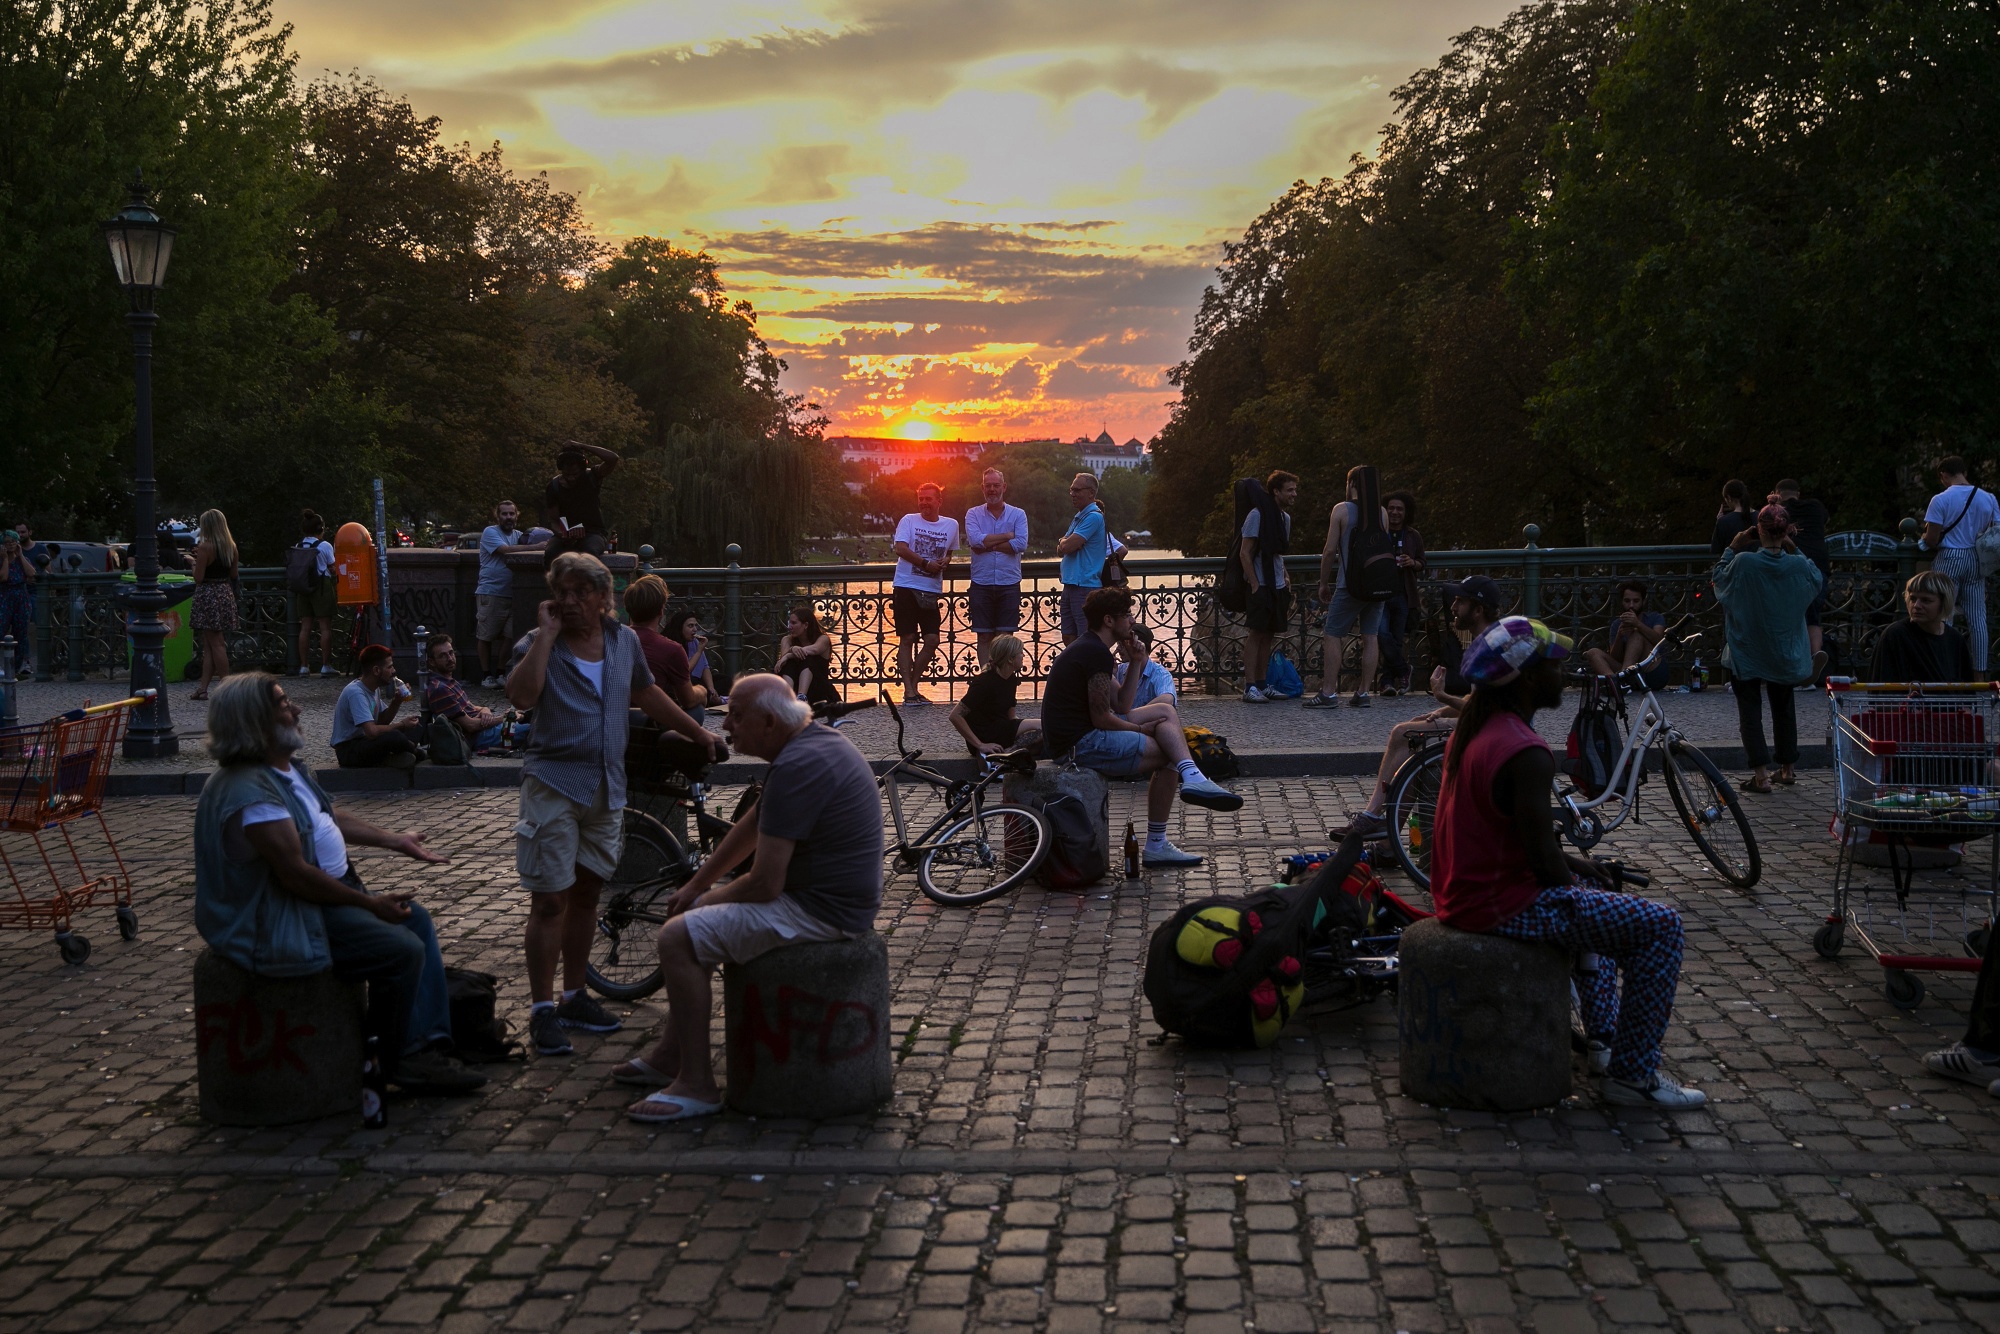 Berliners relax on a bridge at dusk in the Kreuzberg district in Berlin on Sept. 16.